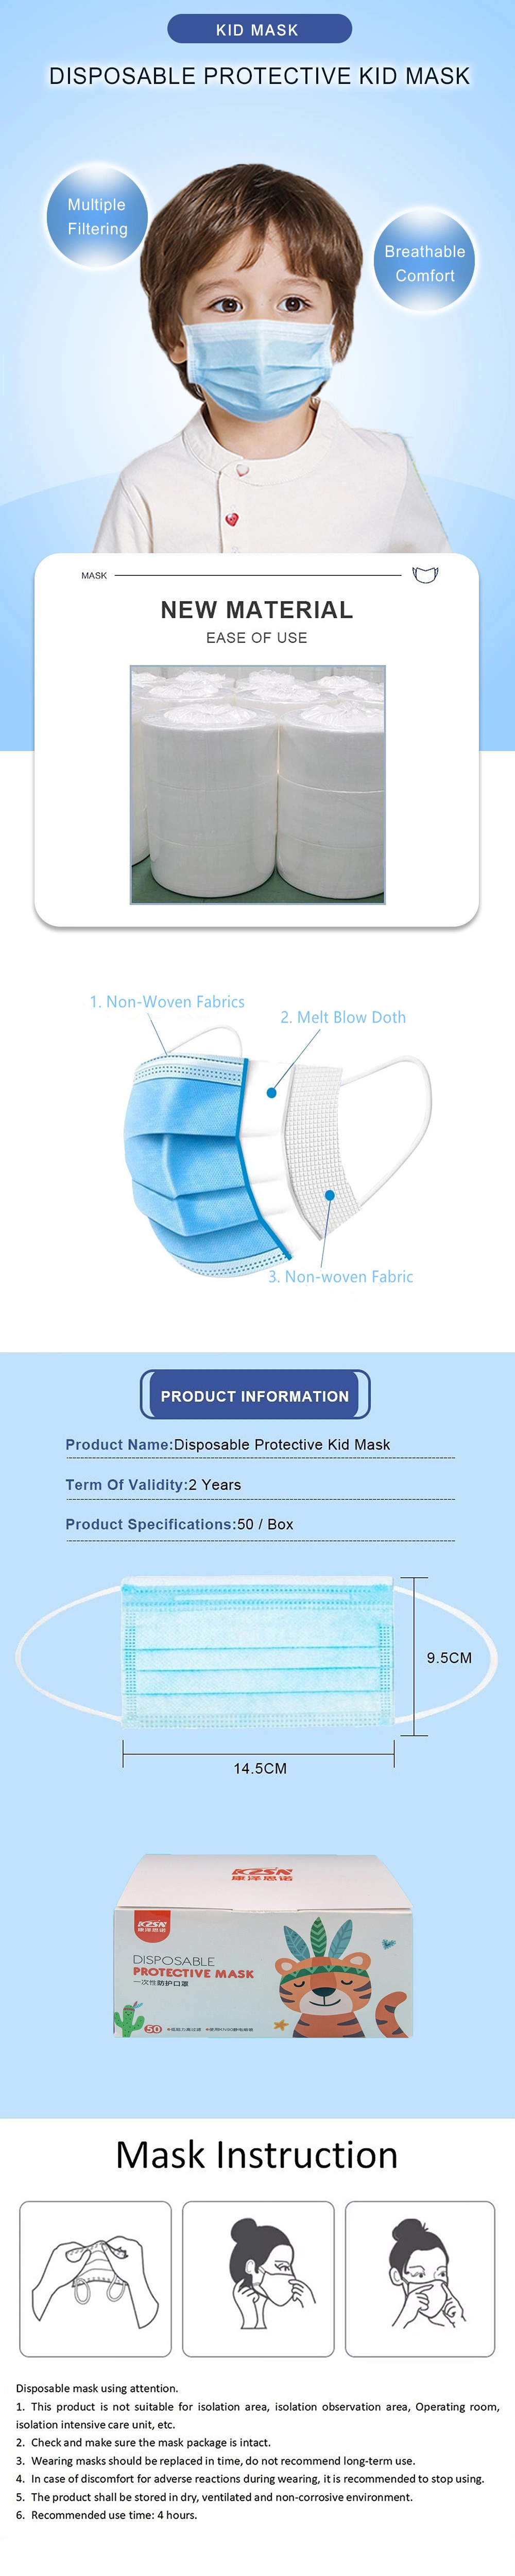 in Stock Outdoor 3 Layer Disposable Child Face Mask for Kids Face Protective Good Quality Mask